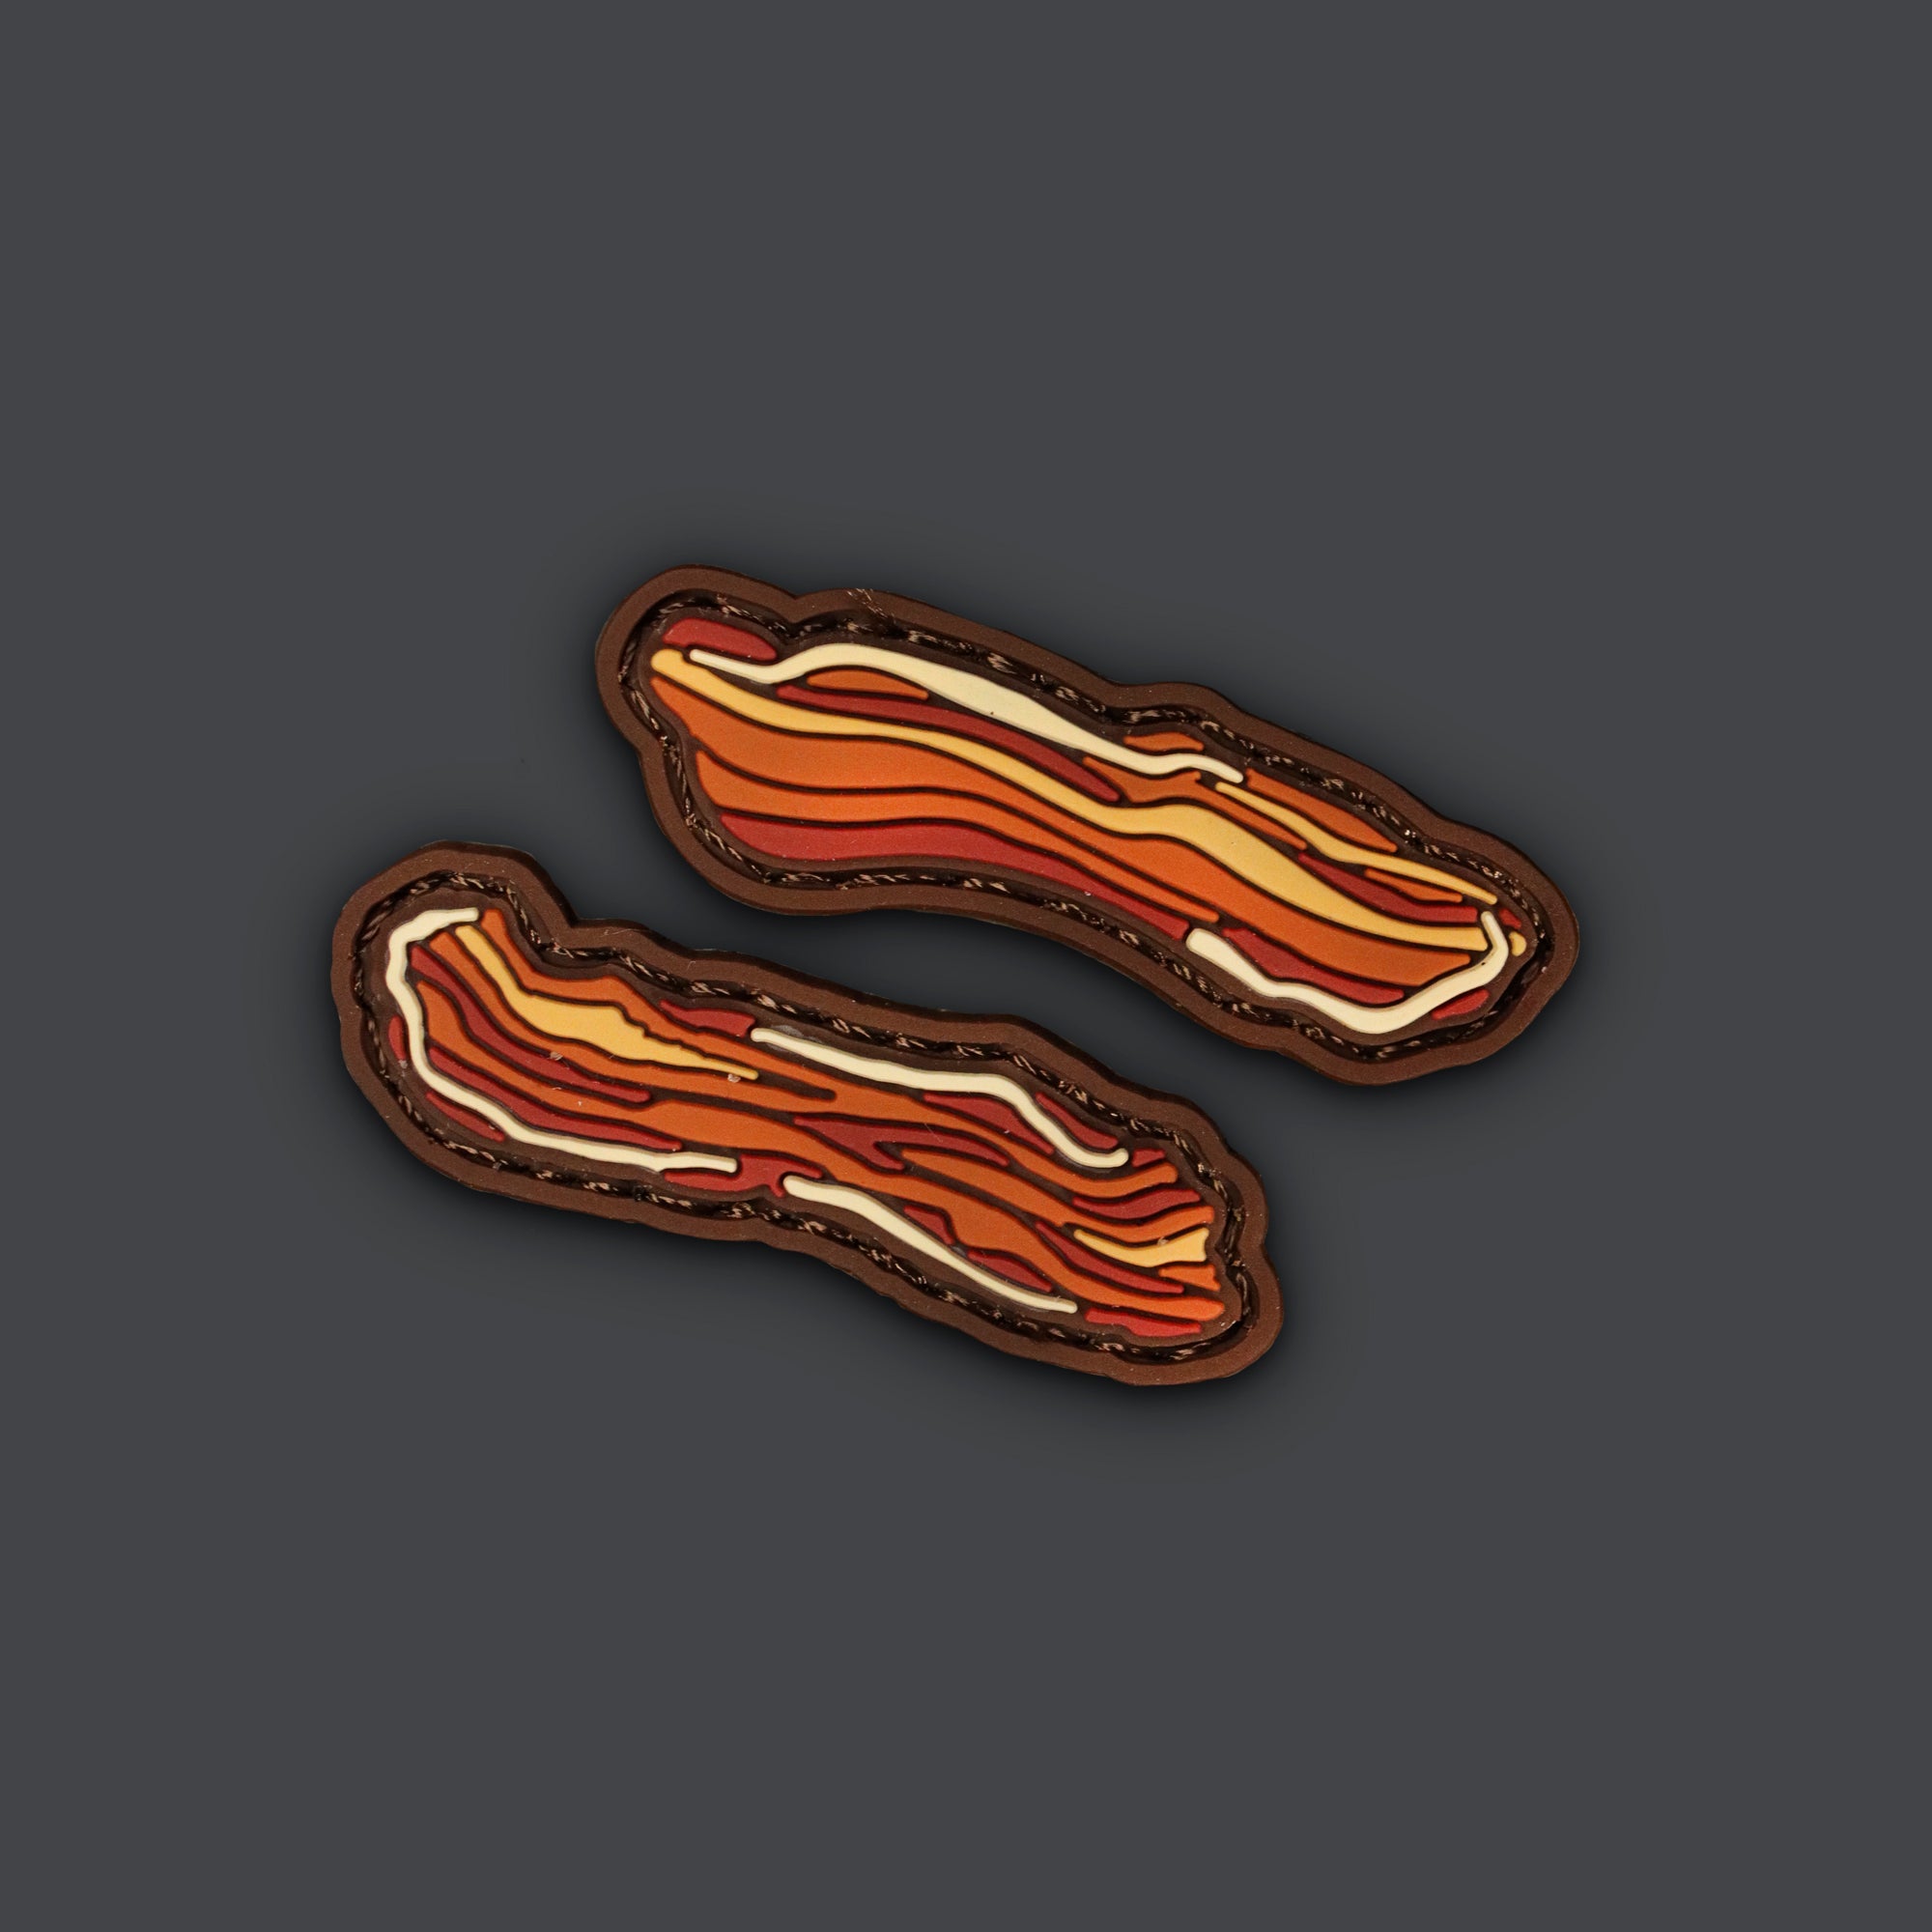 Bacon Ranger Eye Morale Patch Set / Pair "COOKED BACON"